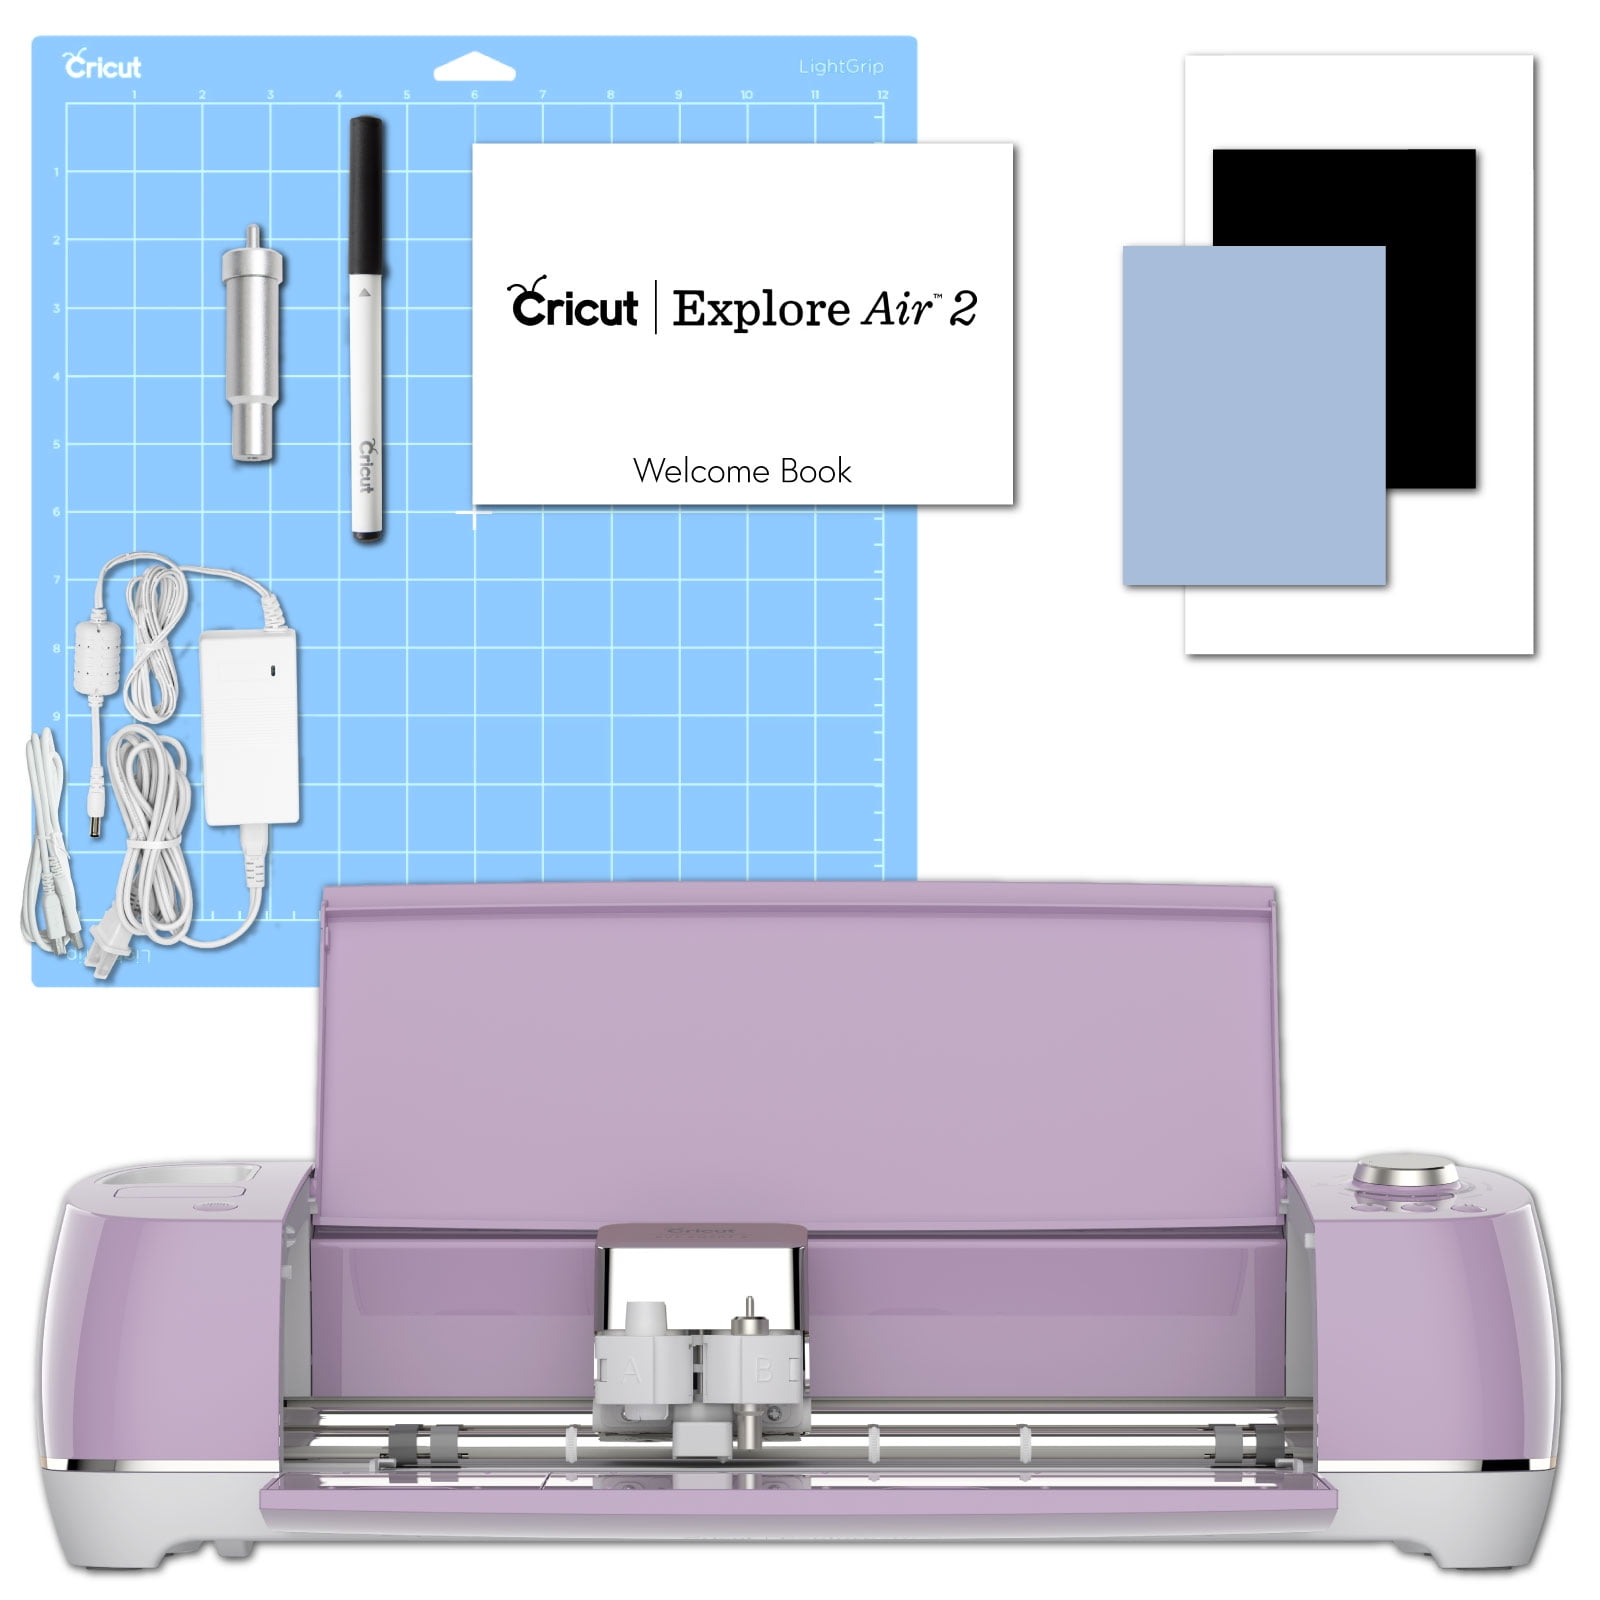 Smart Cutting Machine: Cricut Explore Air 2 For Beginners: Getting Started  With The Cricut Explore Air 2 (Paperback), Blue Willow Bookshop